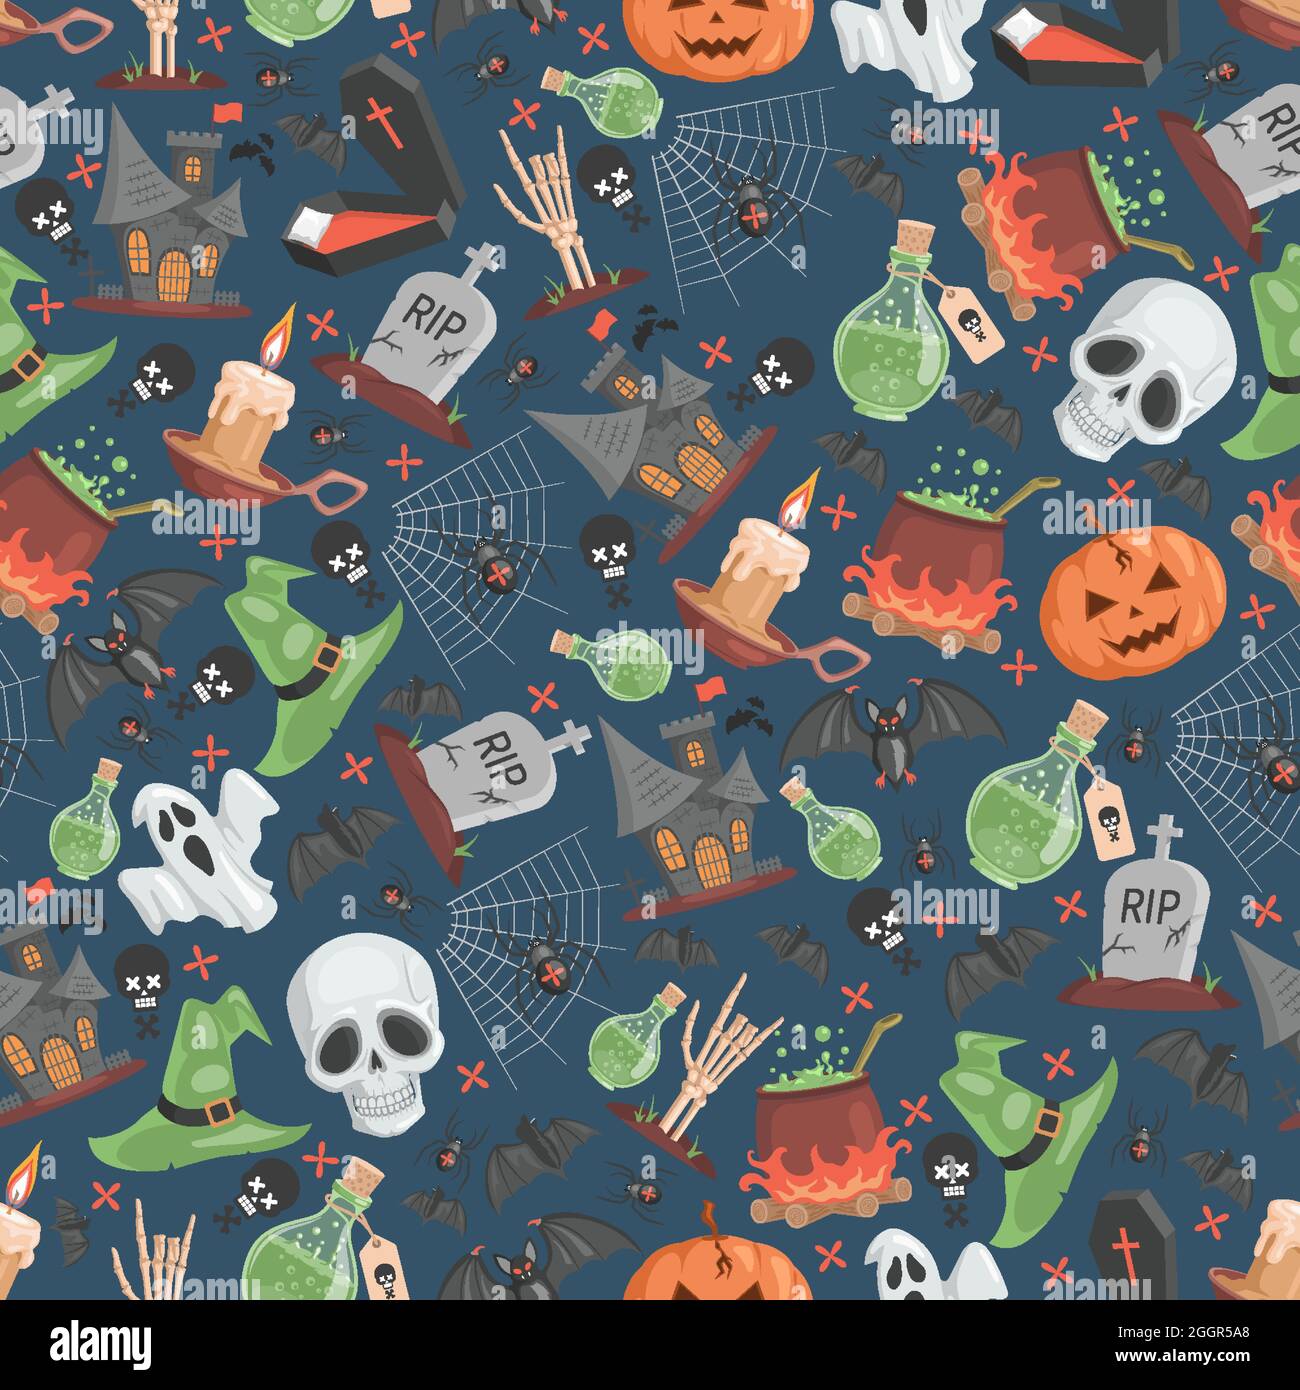 Halloween seamless pattern. Ugly and scary skulls, witch hats, poisons, spiders on web, skeletons, bats, and pumpkins on blue background. Trick or treat Halloween party vector flat cartoon backdrop. Stock Vector